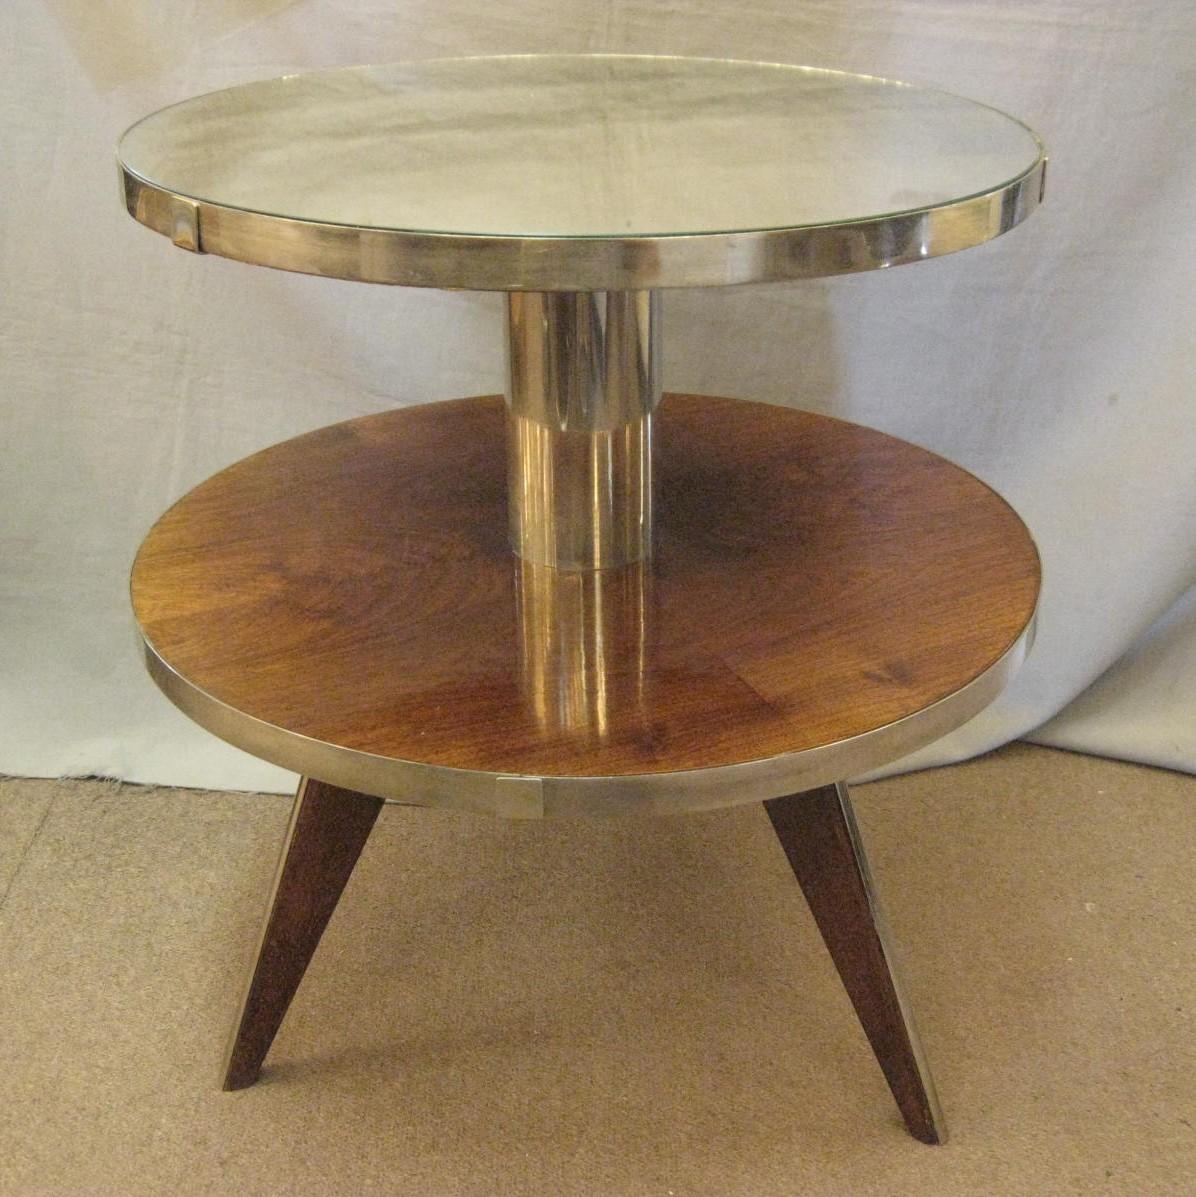 French Art Deco Occasional Table in Wood, Mirror, Nickel -Maurice Triboy For Sale 9